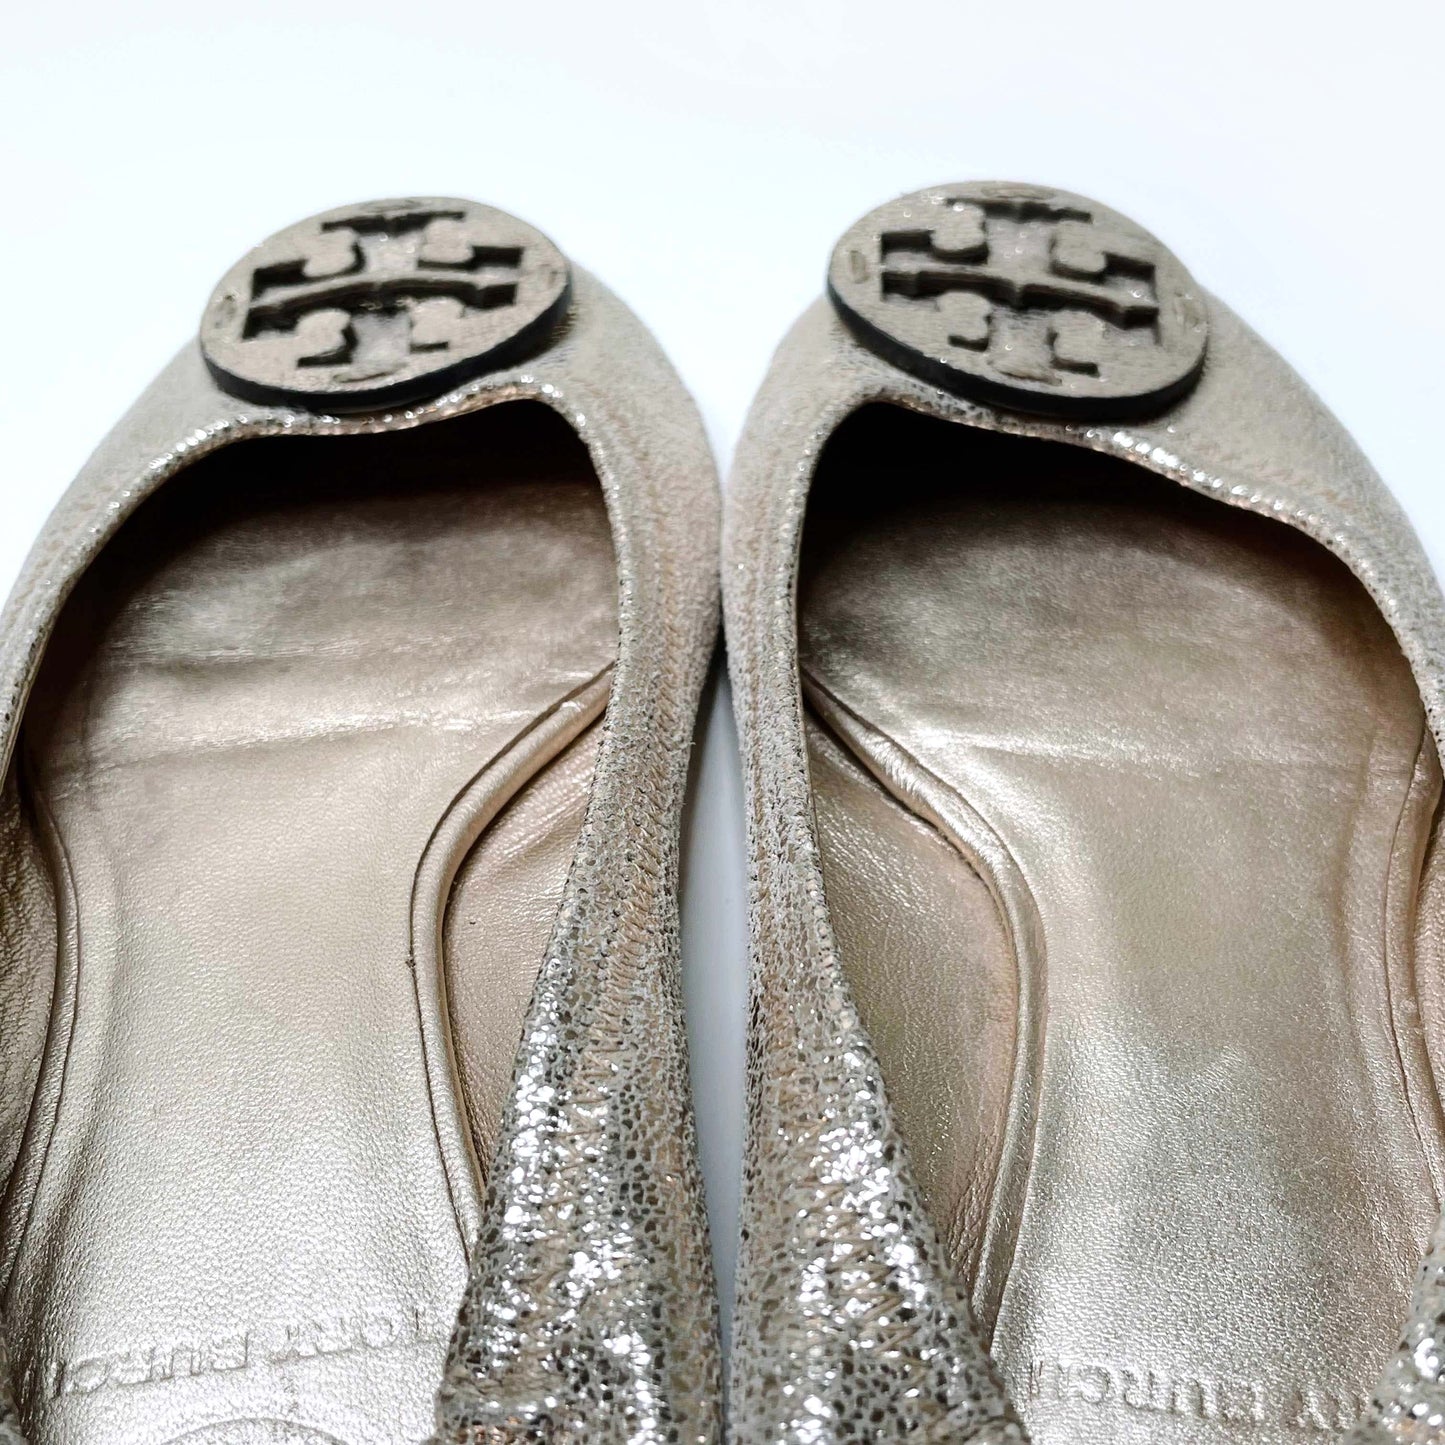 tory burch gold leather minnie ballet flats - size 6